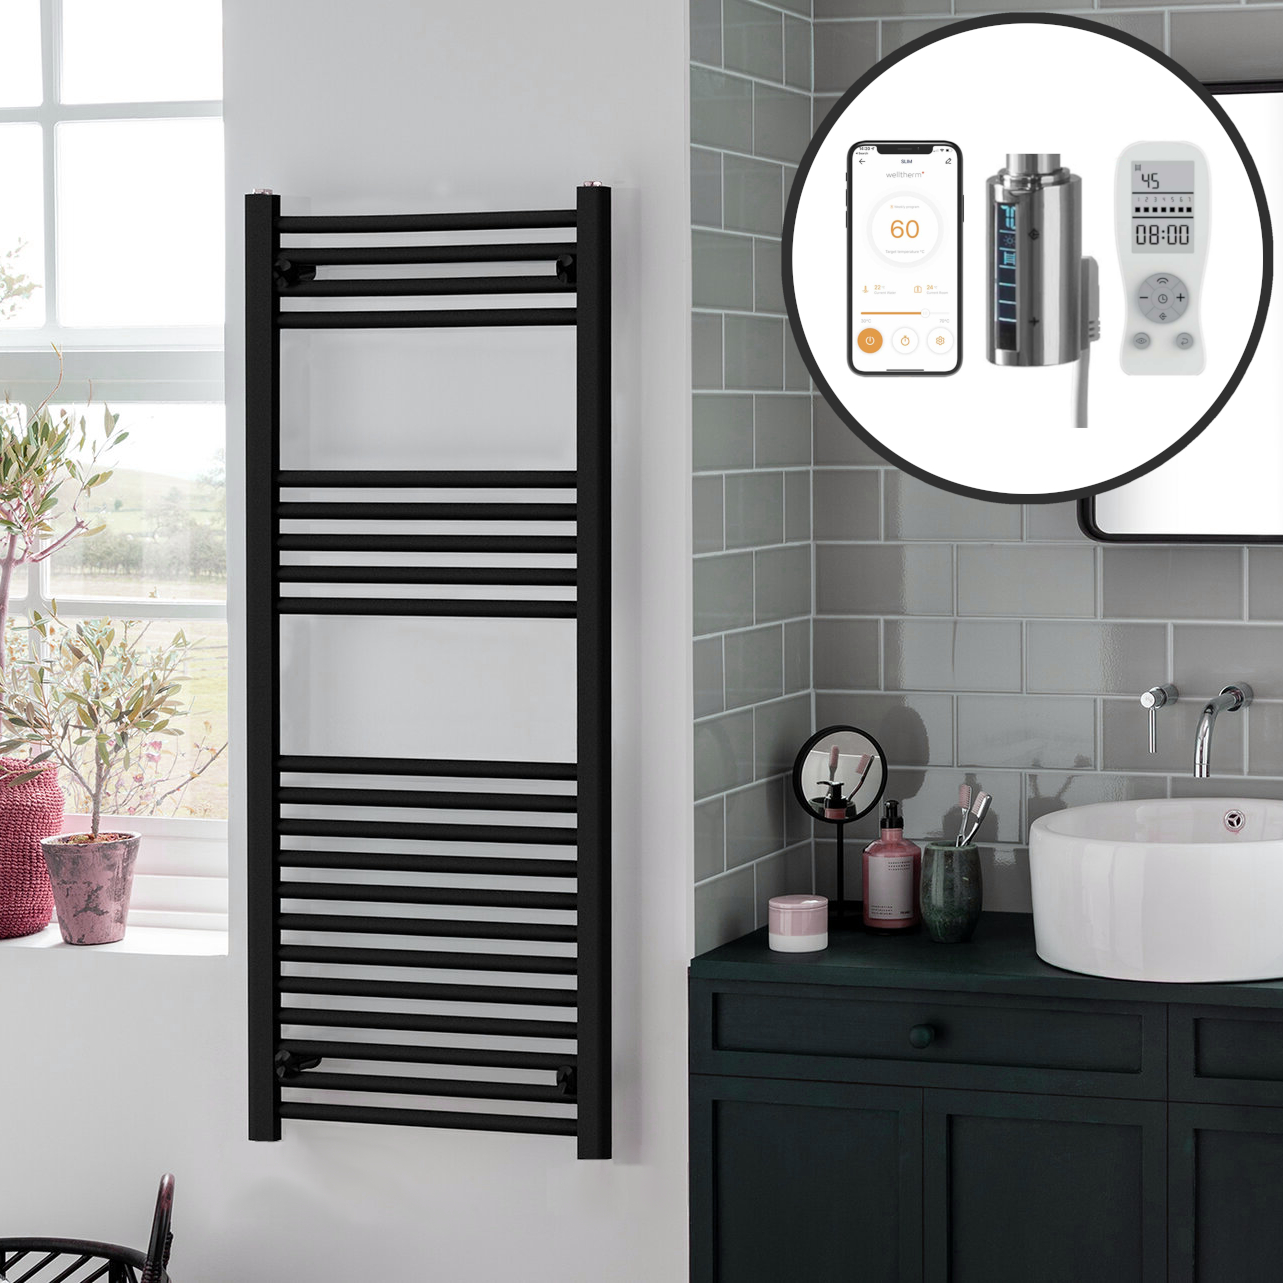 Bray Straight Black | Smart Electric Towel Rail with Thermostat, Timer + WiFi Control Best Quality & Price, Energy Saving / Economic To Run Buy Online From Adax SolAire UK Shop